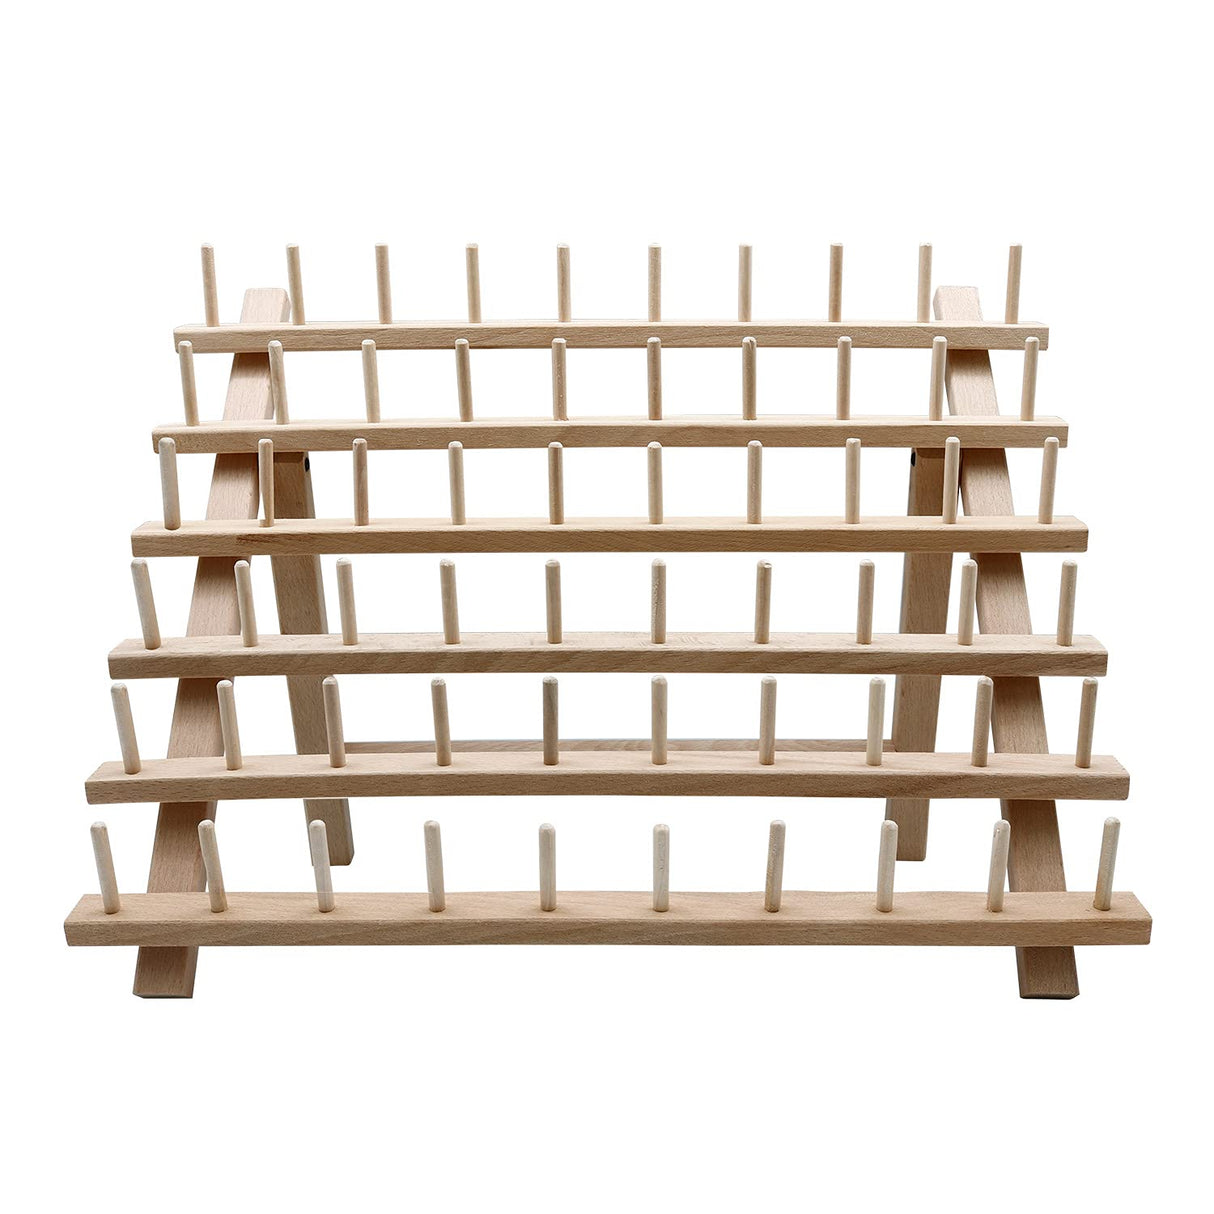 60-spool Thread Rack, Wooden Thread Holder Sewing Organizer For Sewing,  Quilting, Embroidery, Hair-braiding